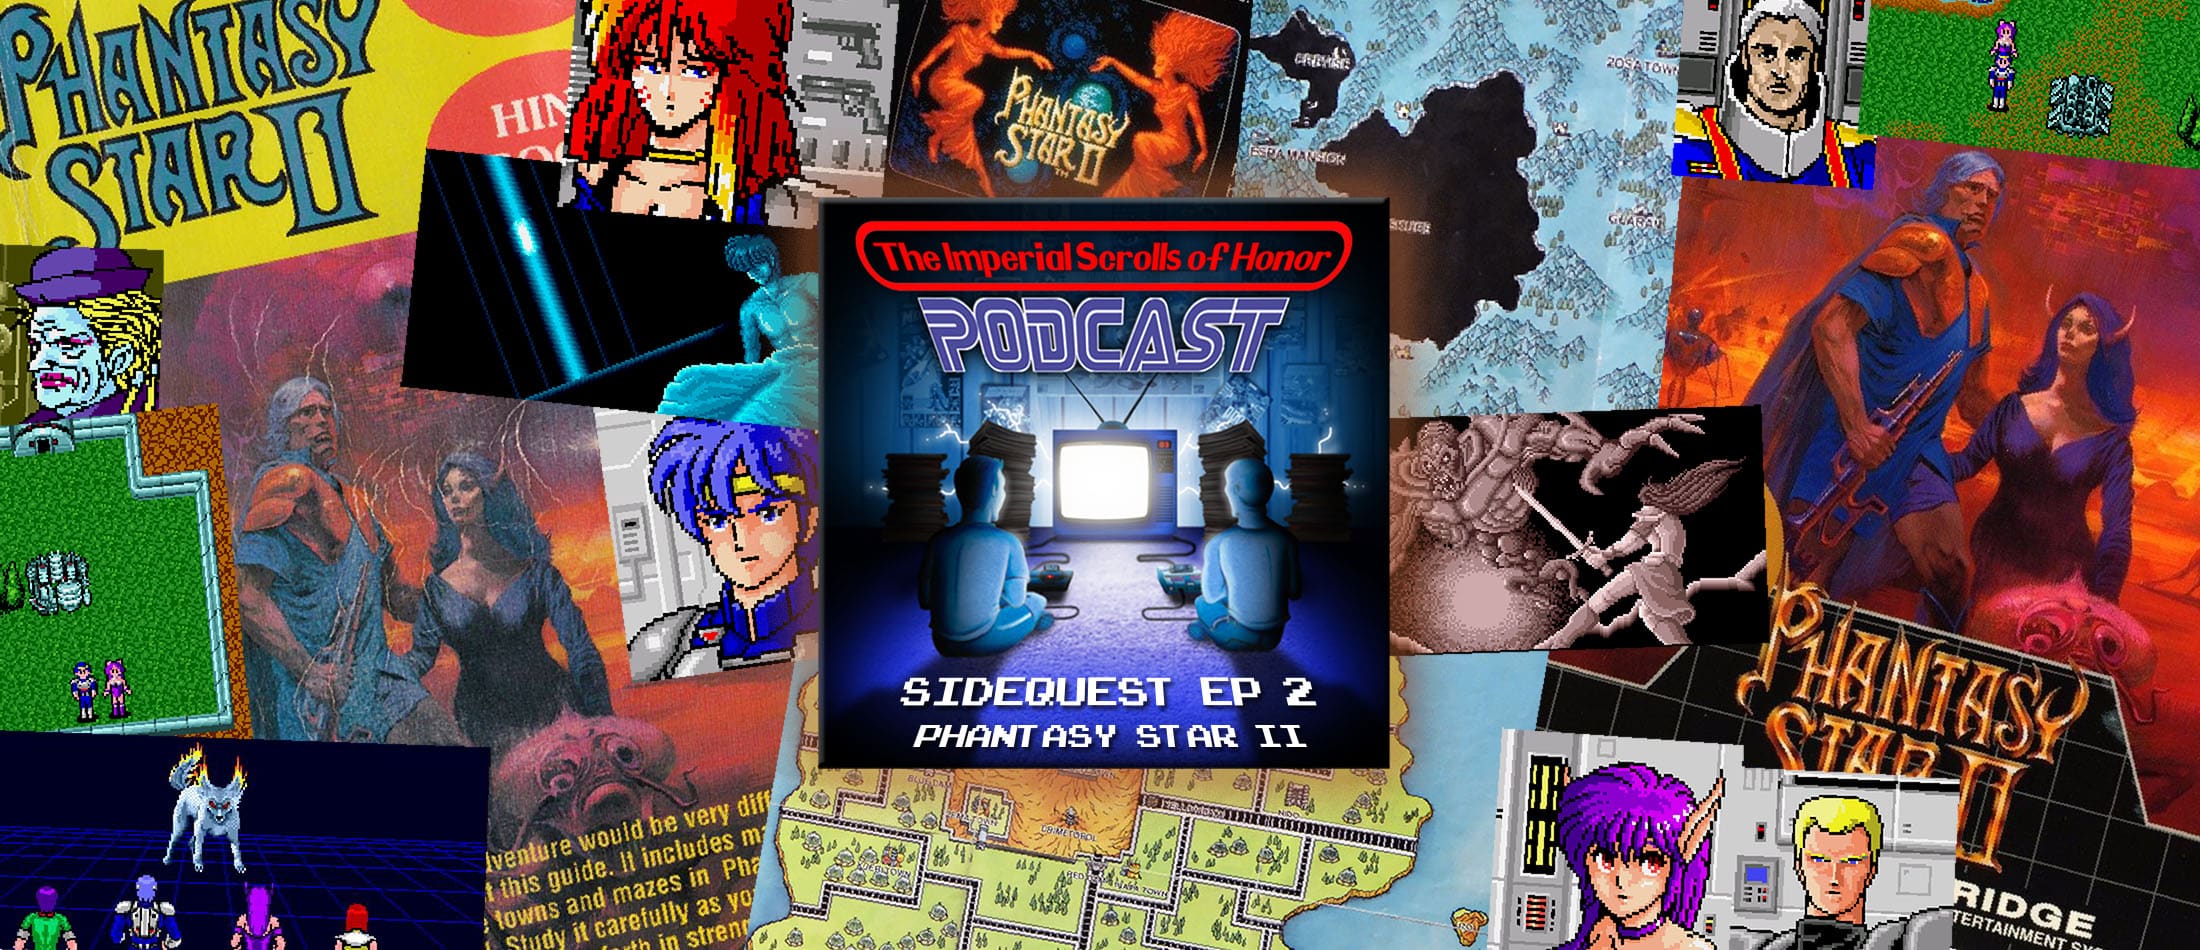 The Imperial Scrolls of Honor Podcast - SIDEQUEST: Phantasty Star II Ep 2